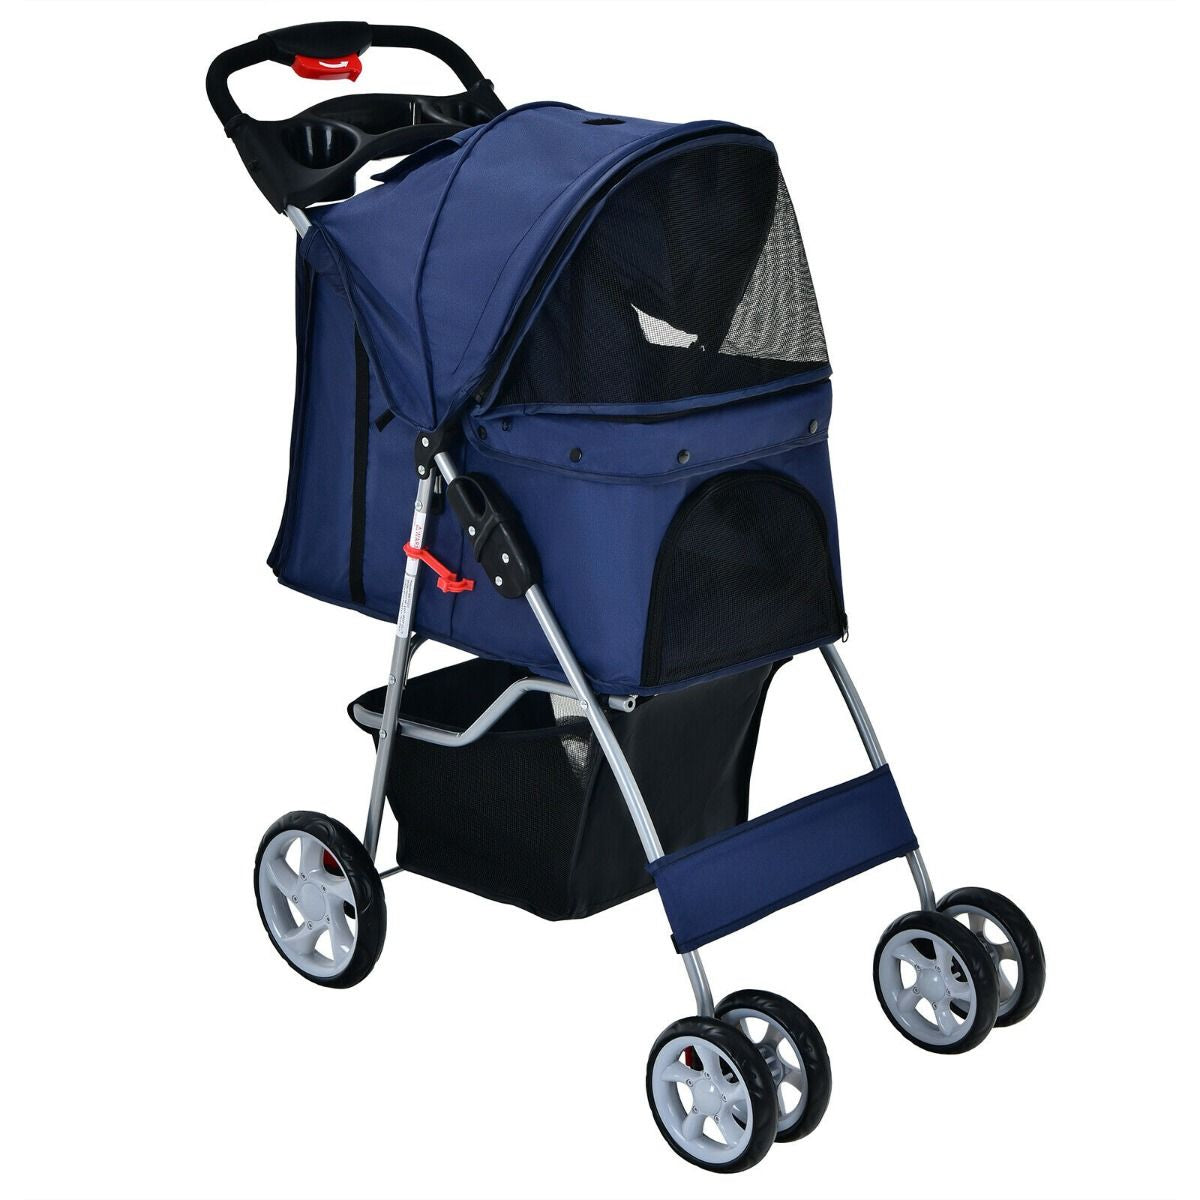 4-Wheel Folding Pet Stroller with Storage Basket and Adjustable Canopy